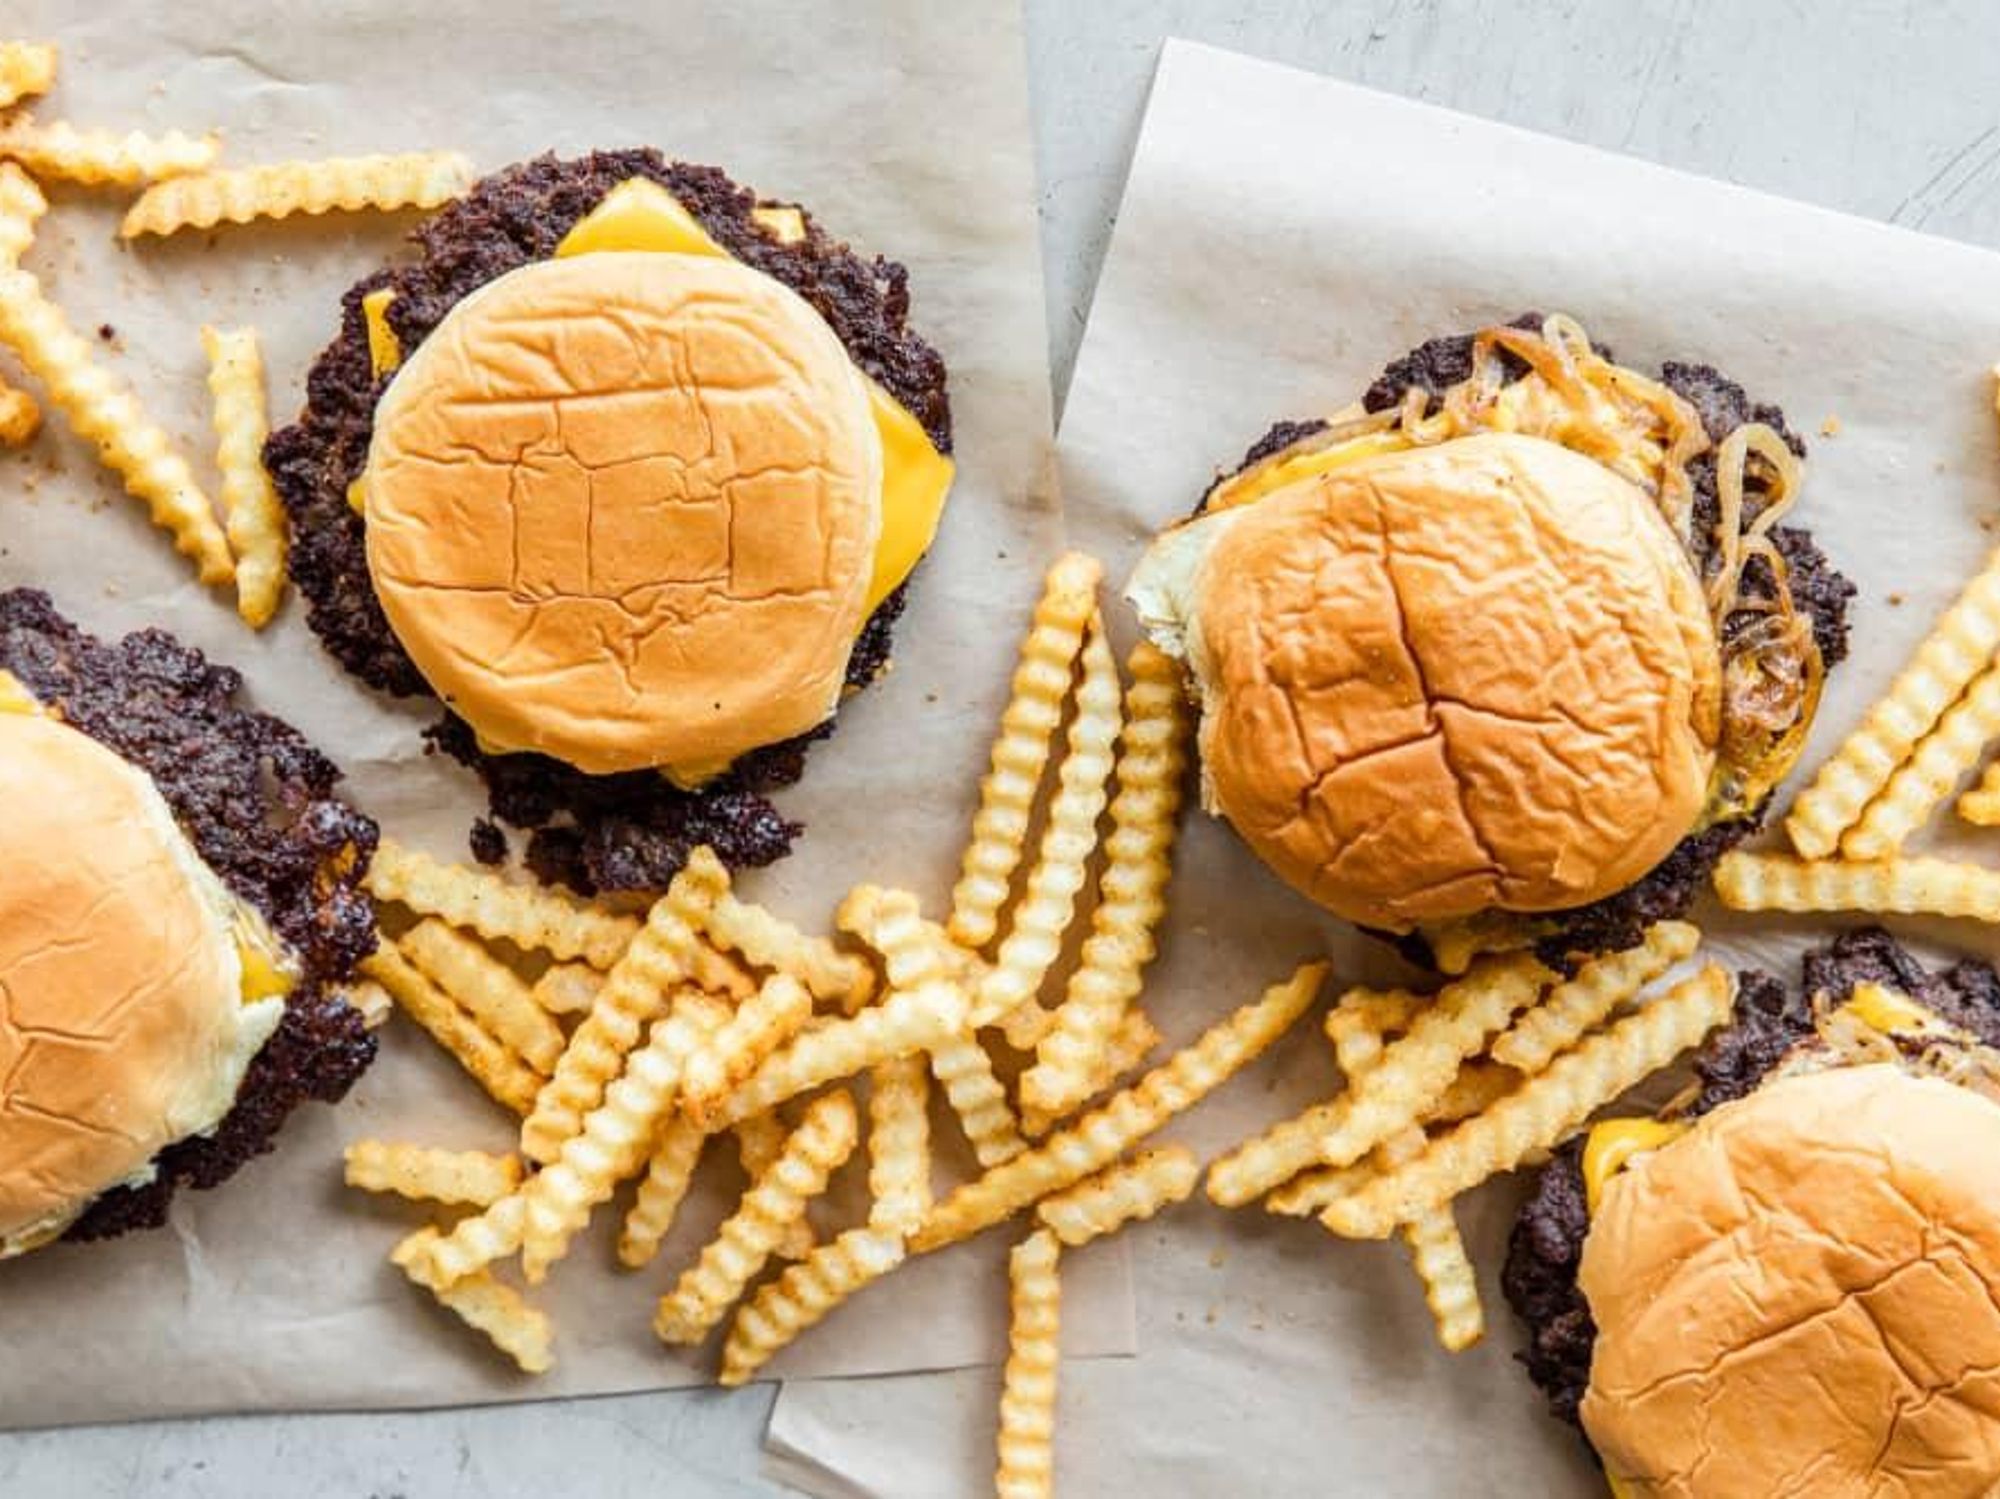 Trill Burgers burger and fries